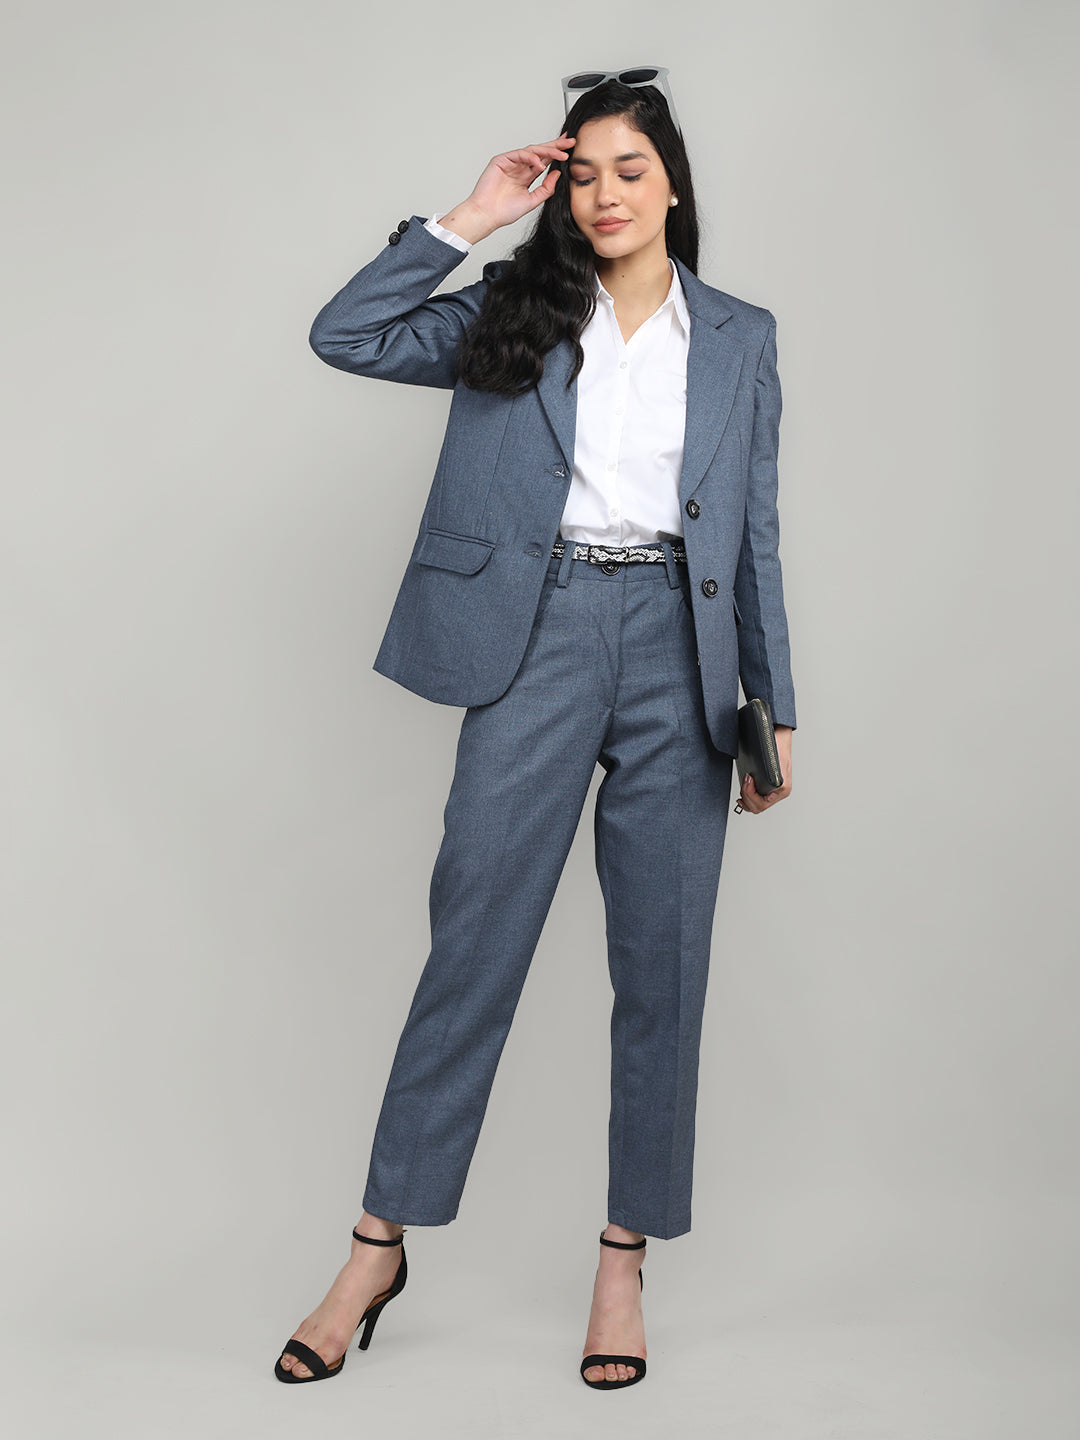 Two Piece Set Women Business Suits Black And Grey Elegant Office